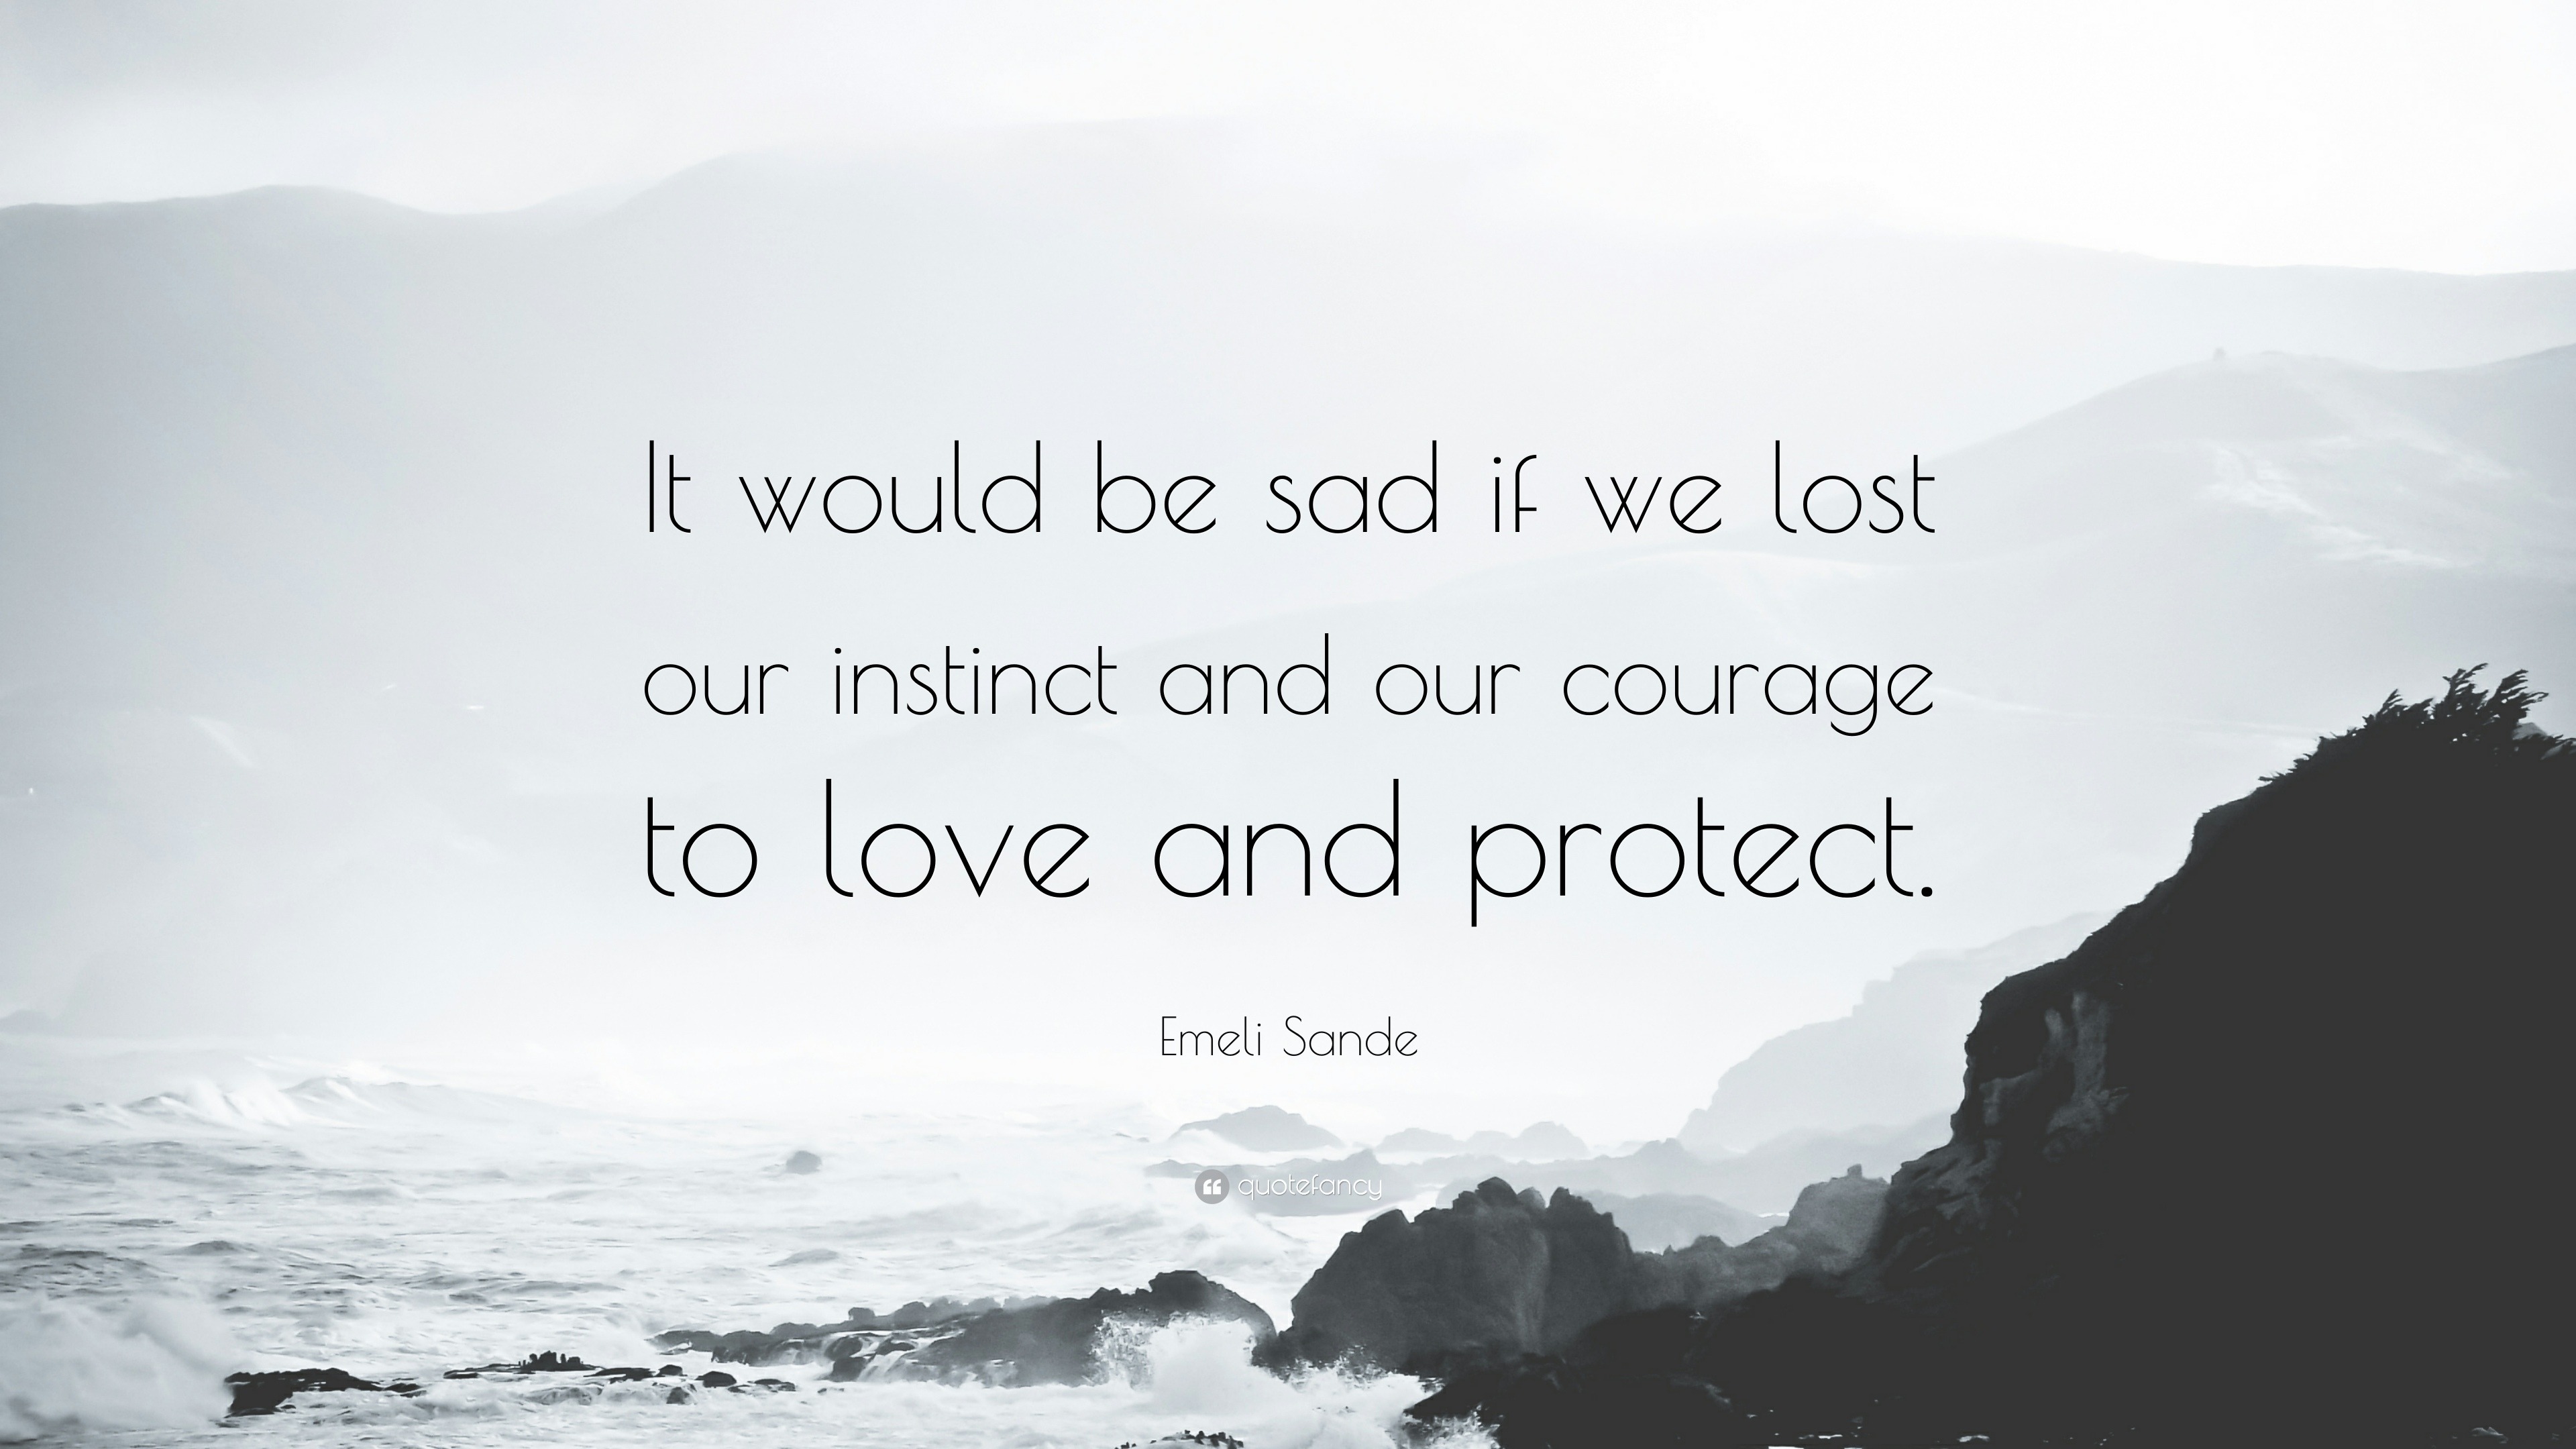 Emeli Sande Quote “It would be sad if we lost our instinct and our